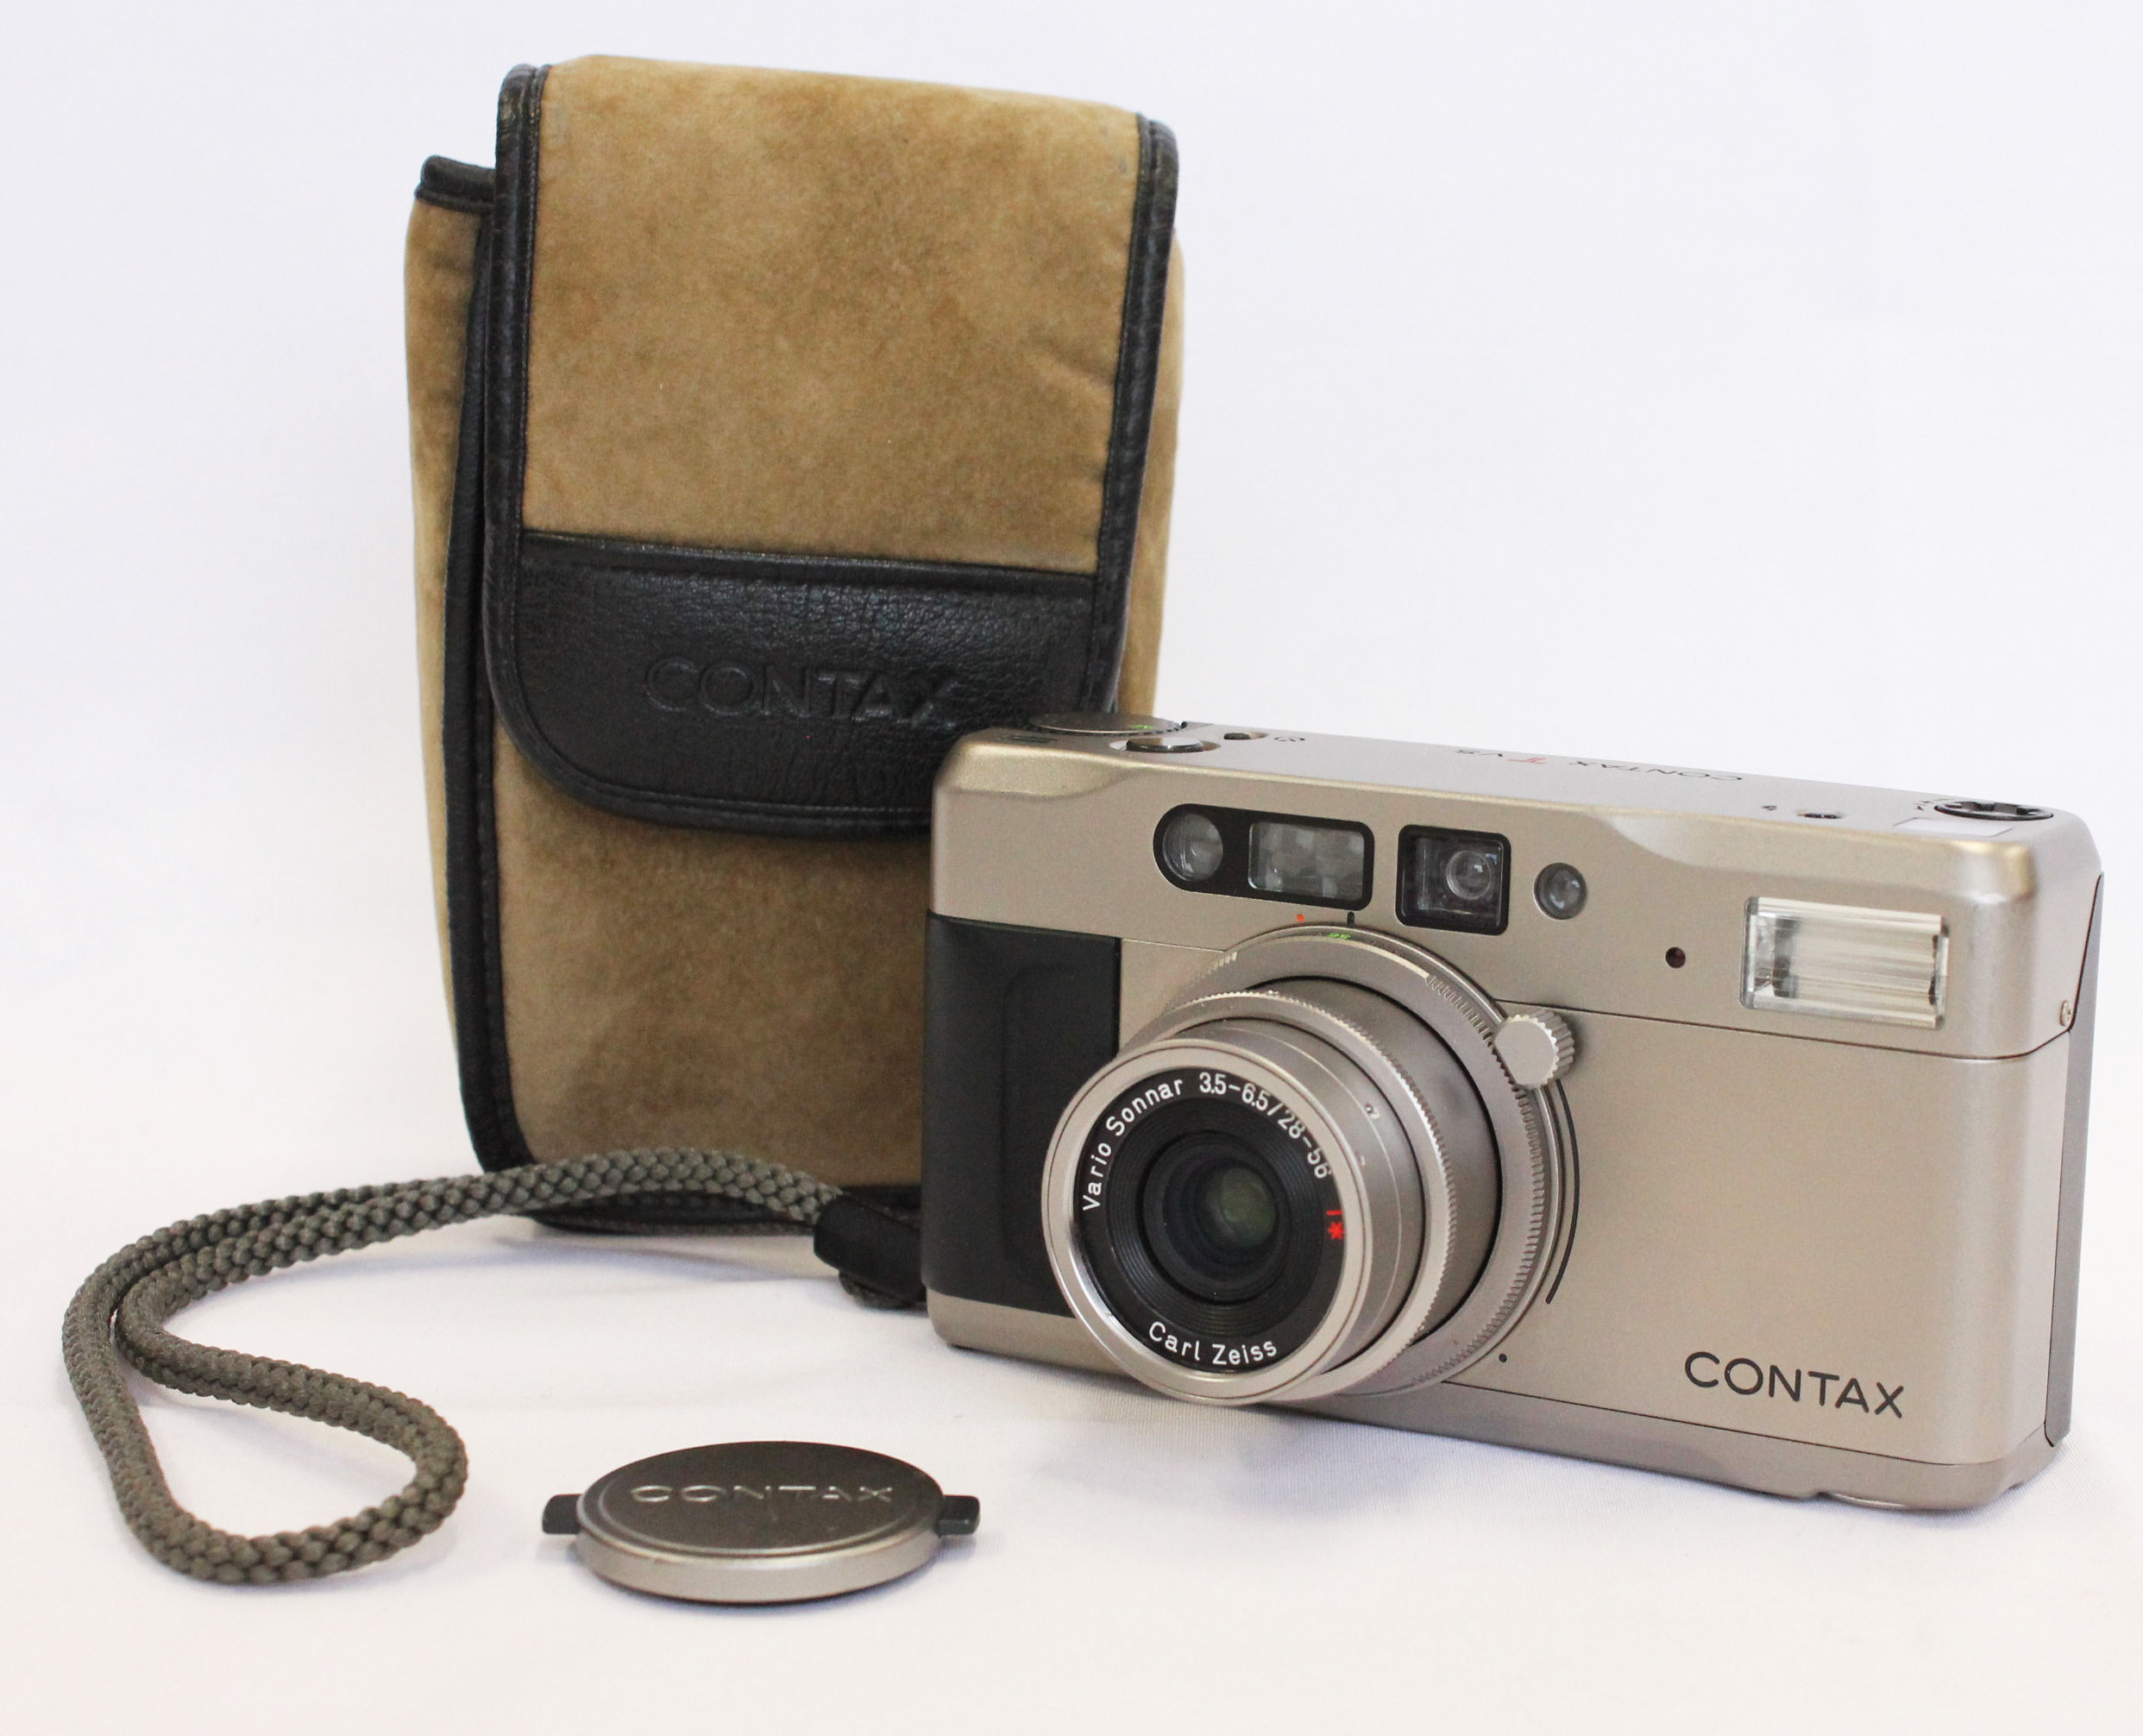 [Near Mint] Contax TVS 35mm Point & Shoot Film Camera with Case from Japan